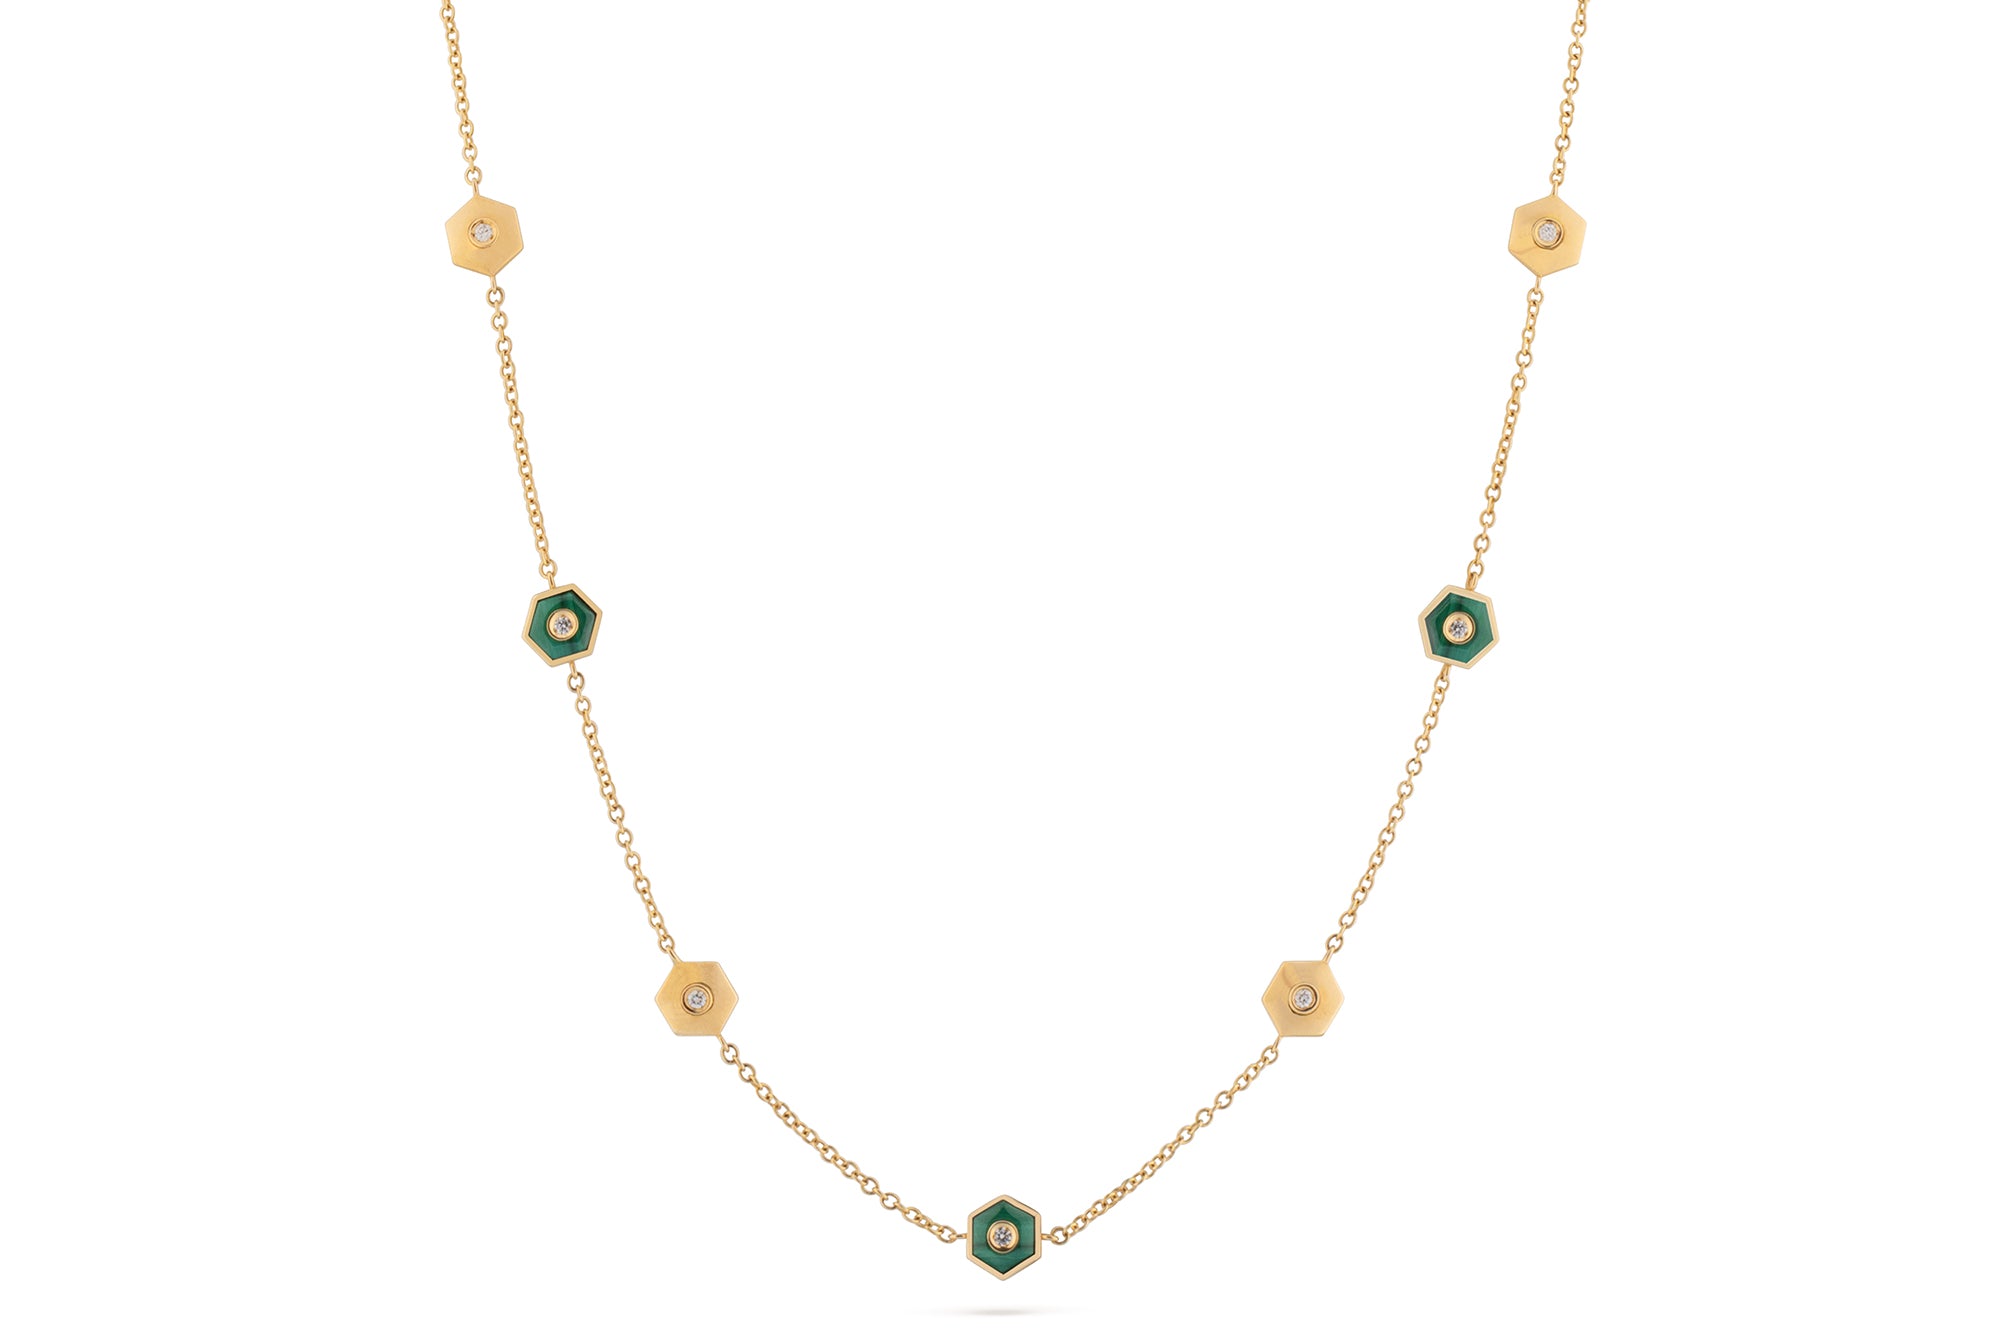 BAIA SOMMERSA NECKLACE